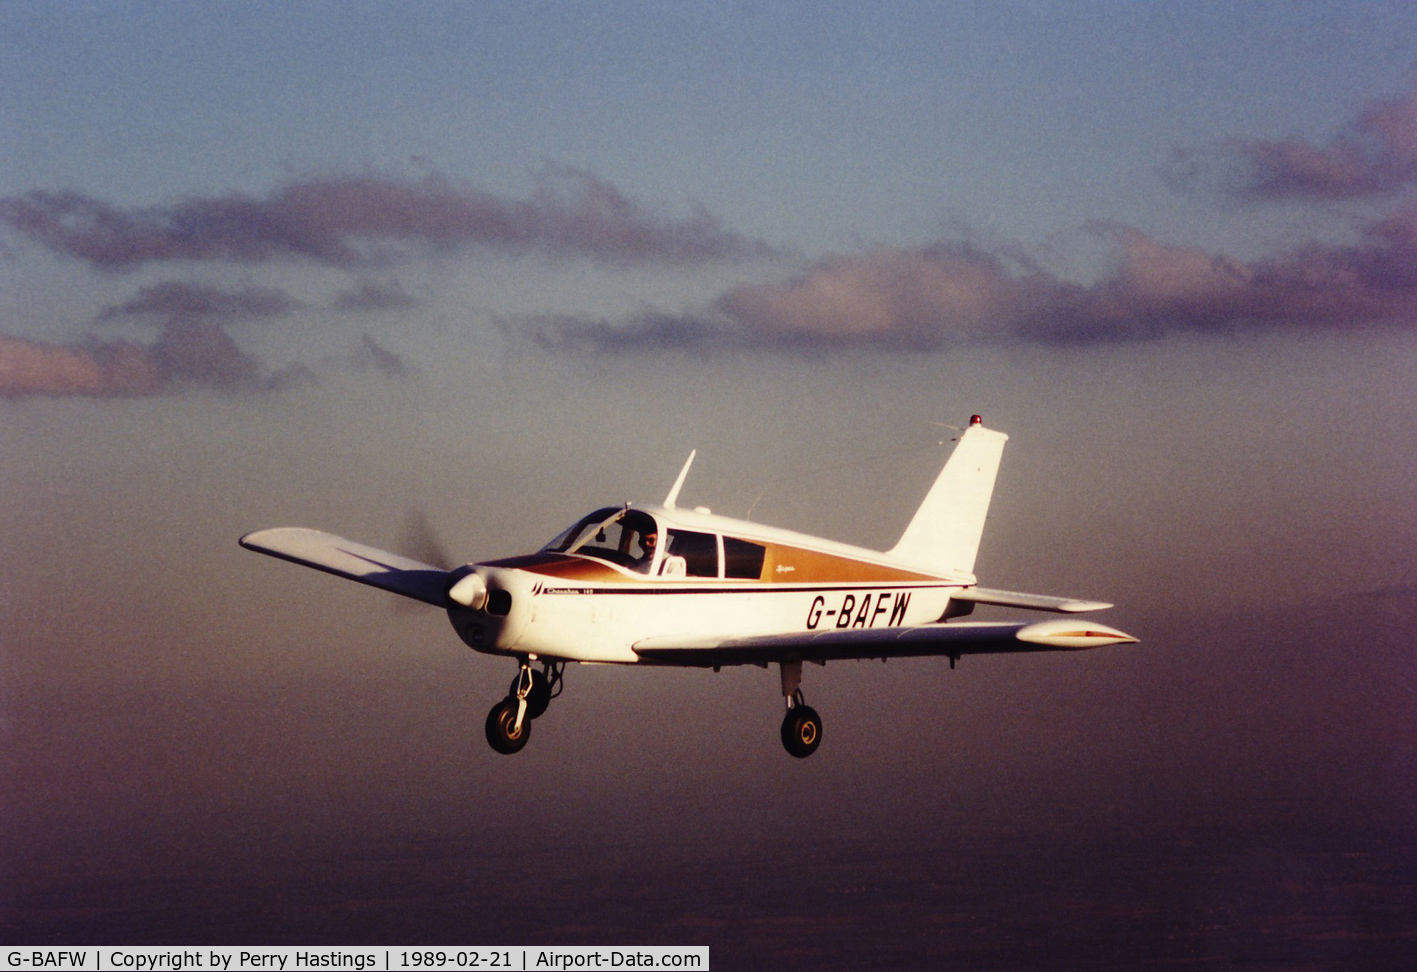 G-BAFW, 1965 Piper PA-28-140 Cherokee C/N 28-21050, G-BAFW up from its Cambridge base in 1989.